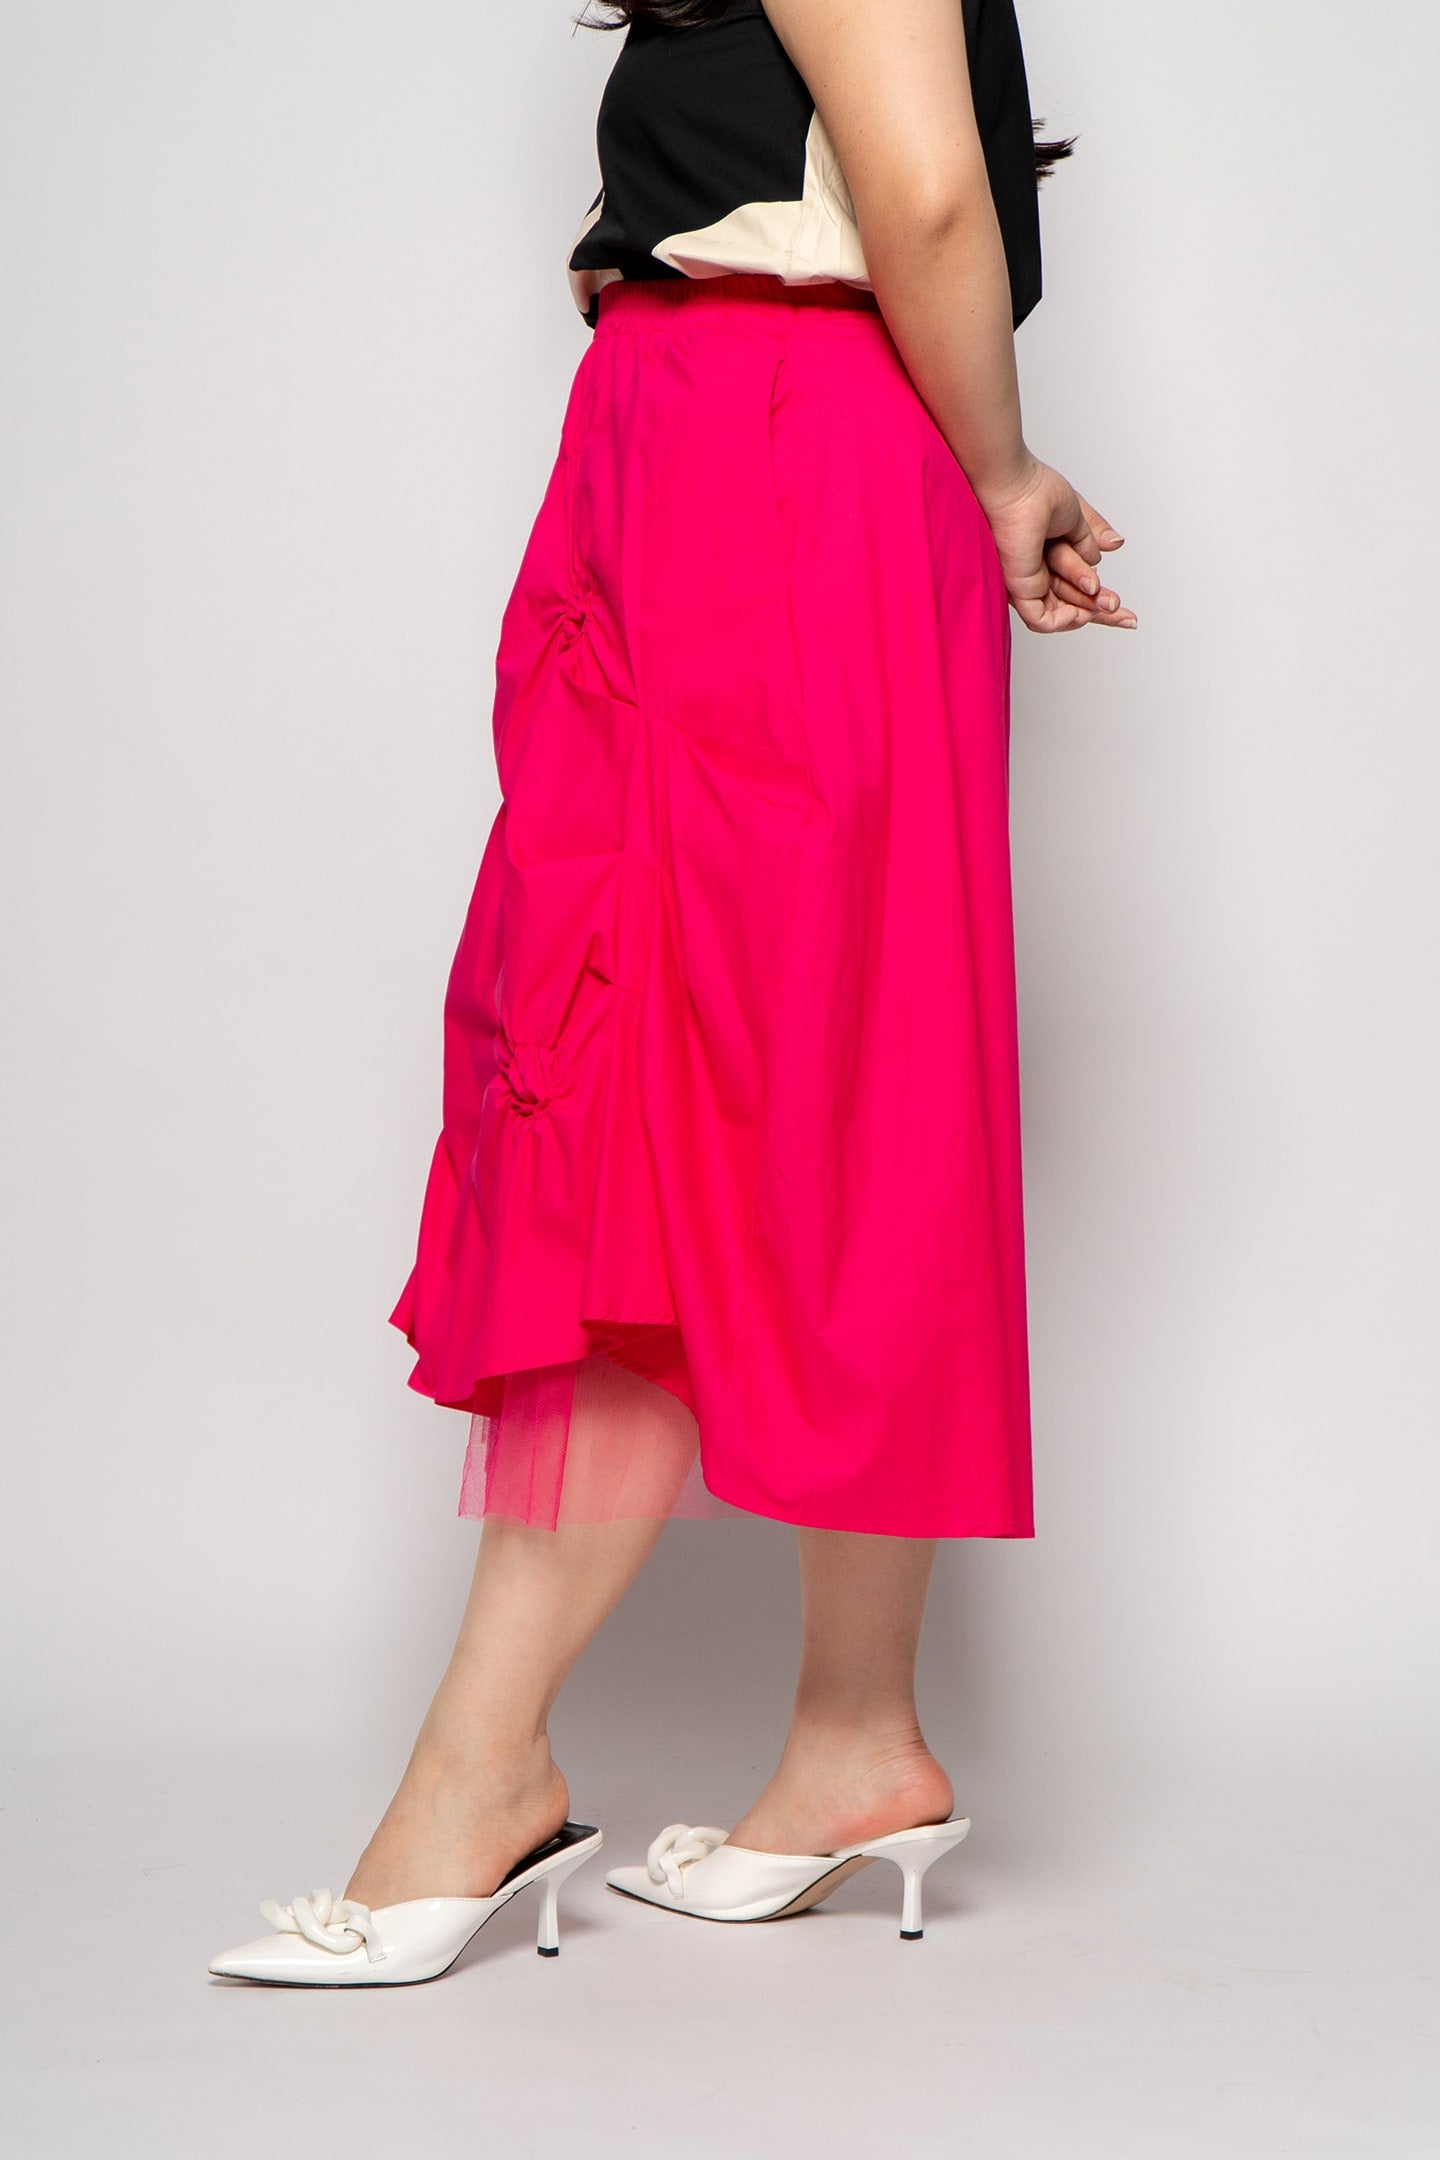 Xanthe Skirt in Pink